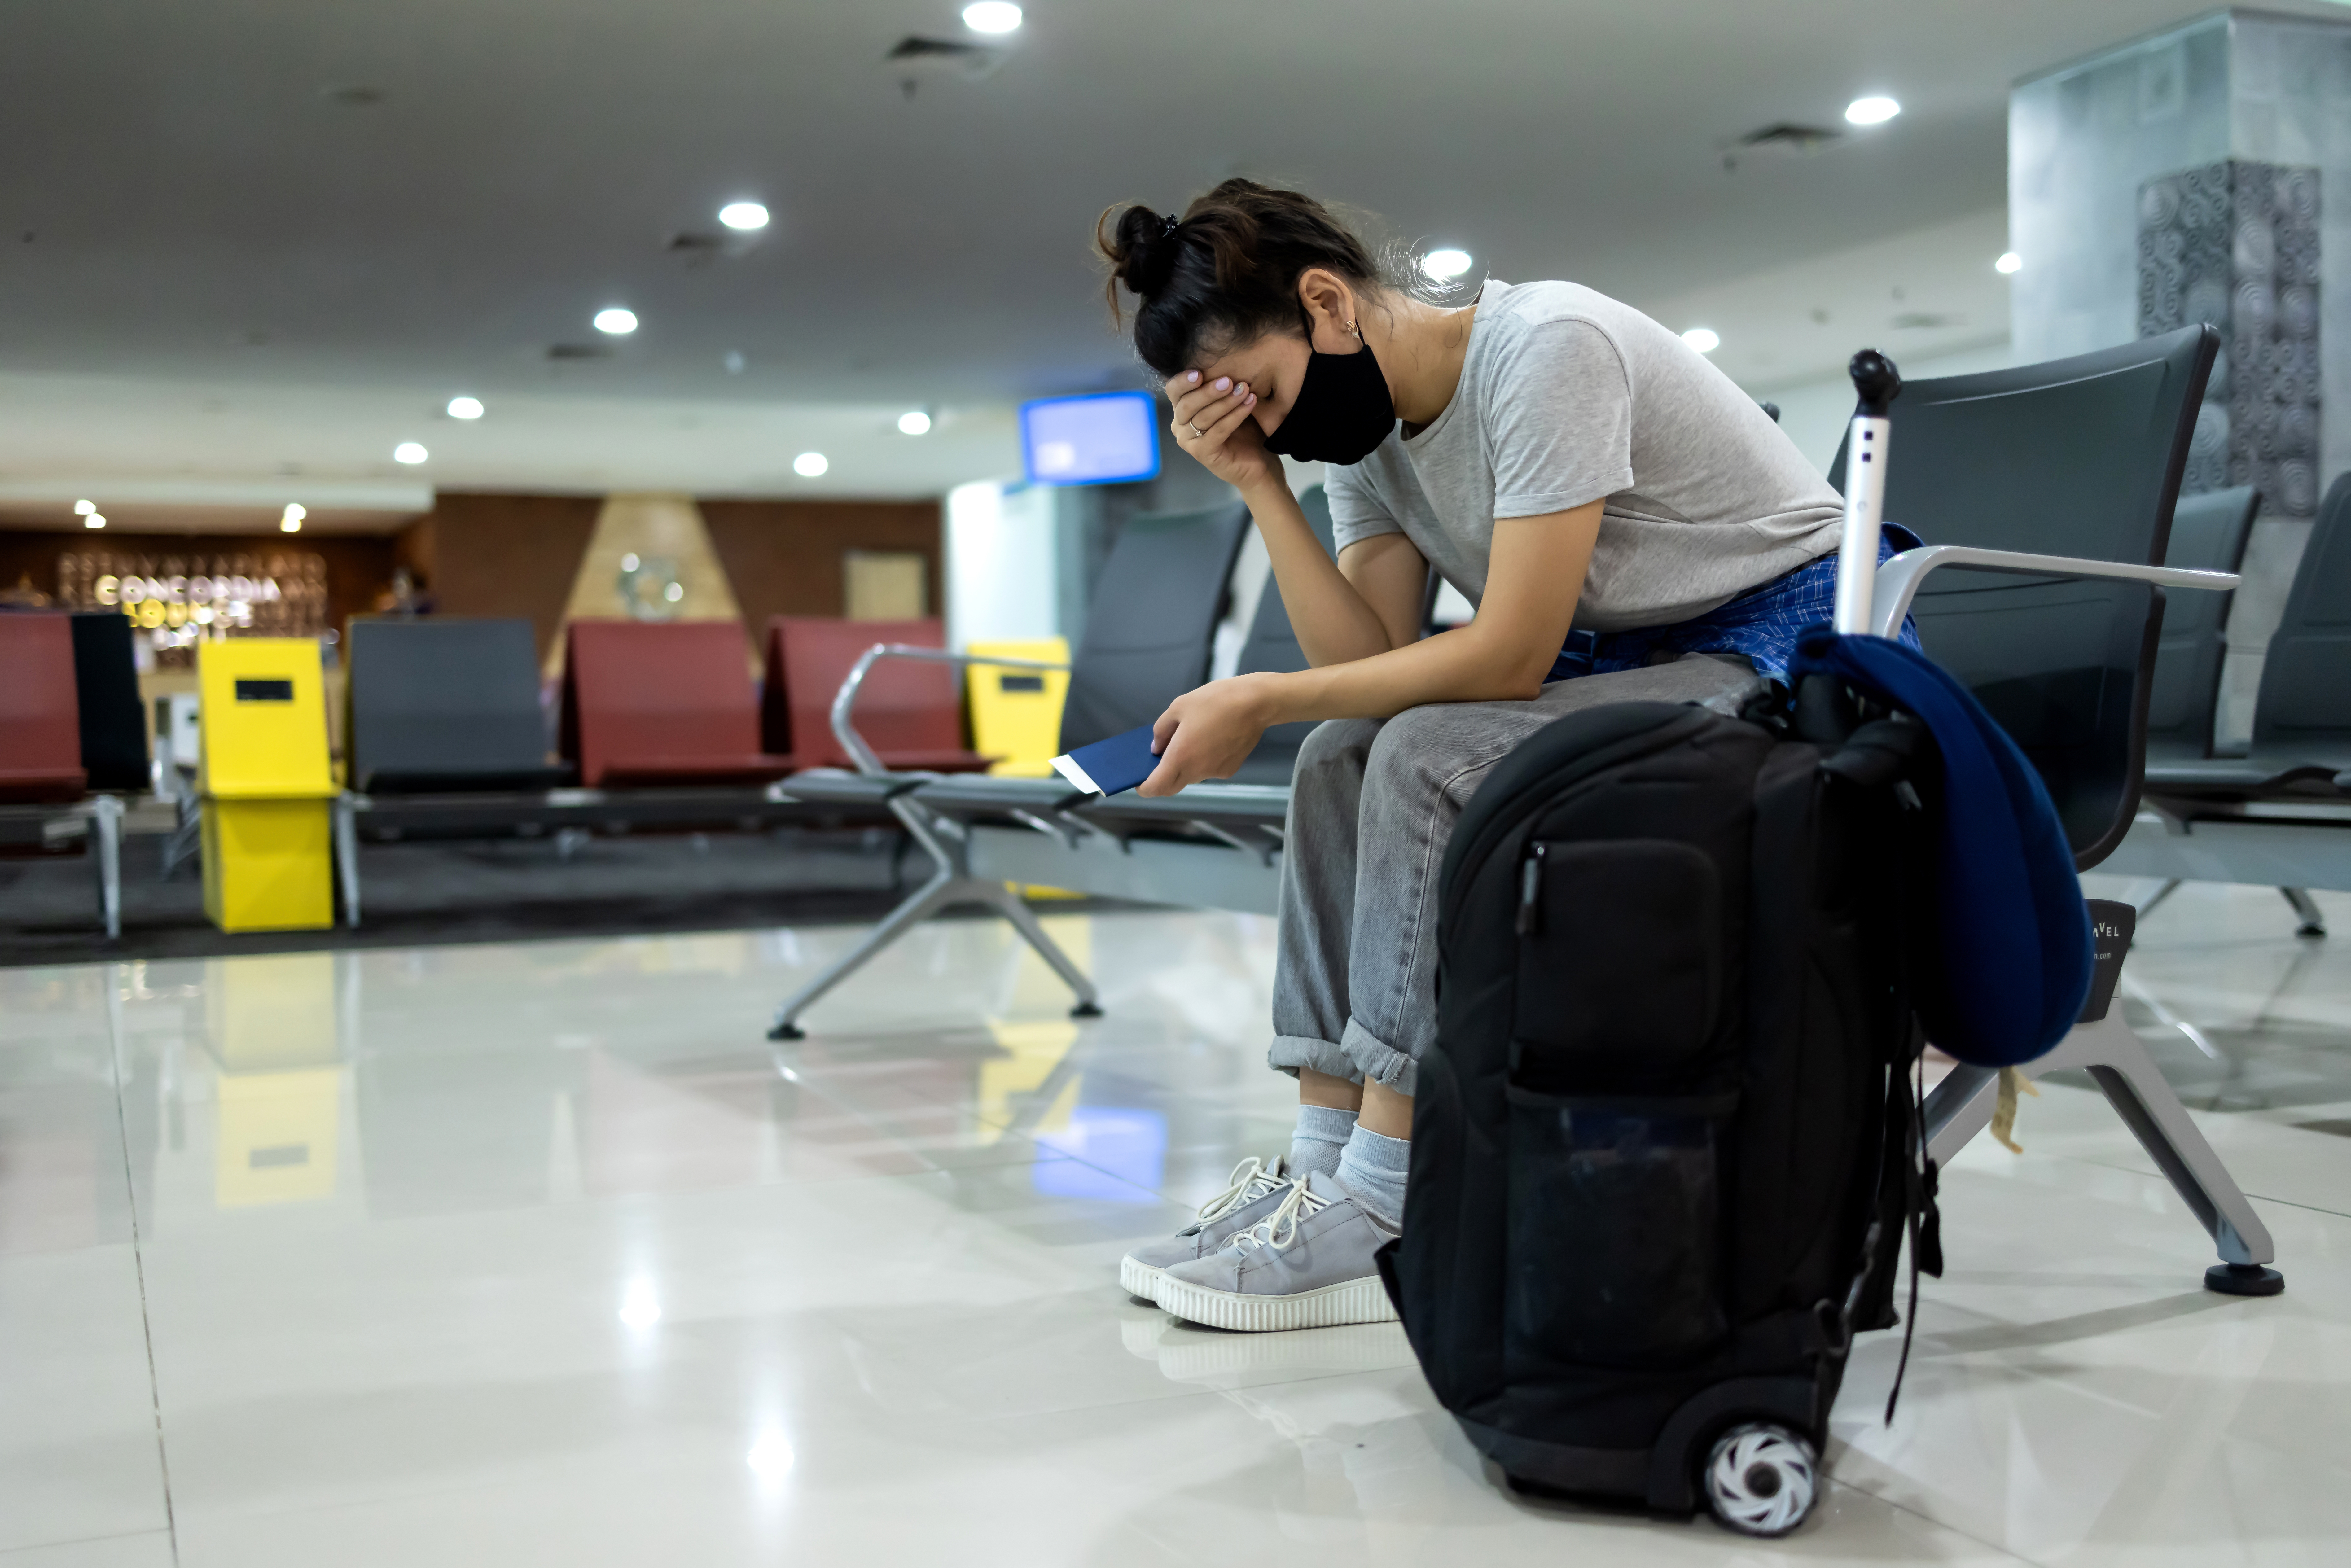 A woman sitting in a waiting lounge with luggage | Source: Shutterstock